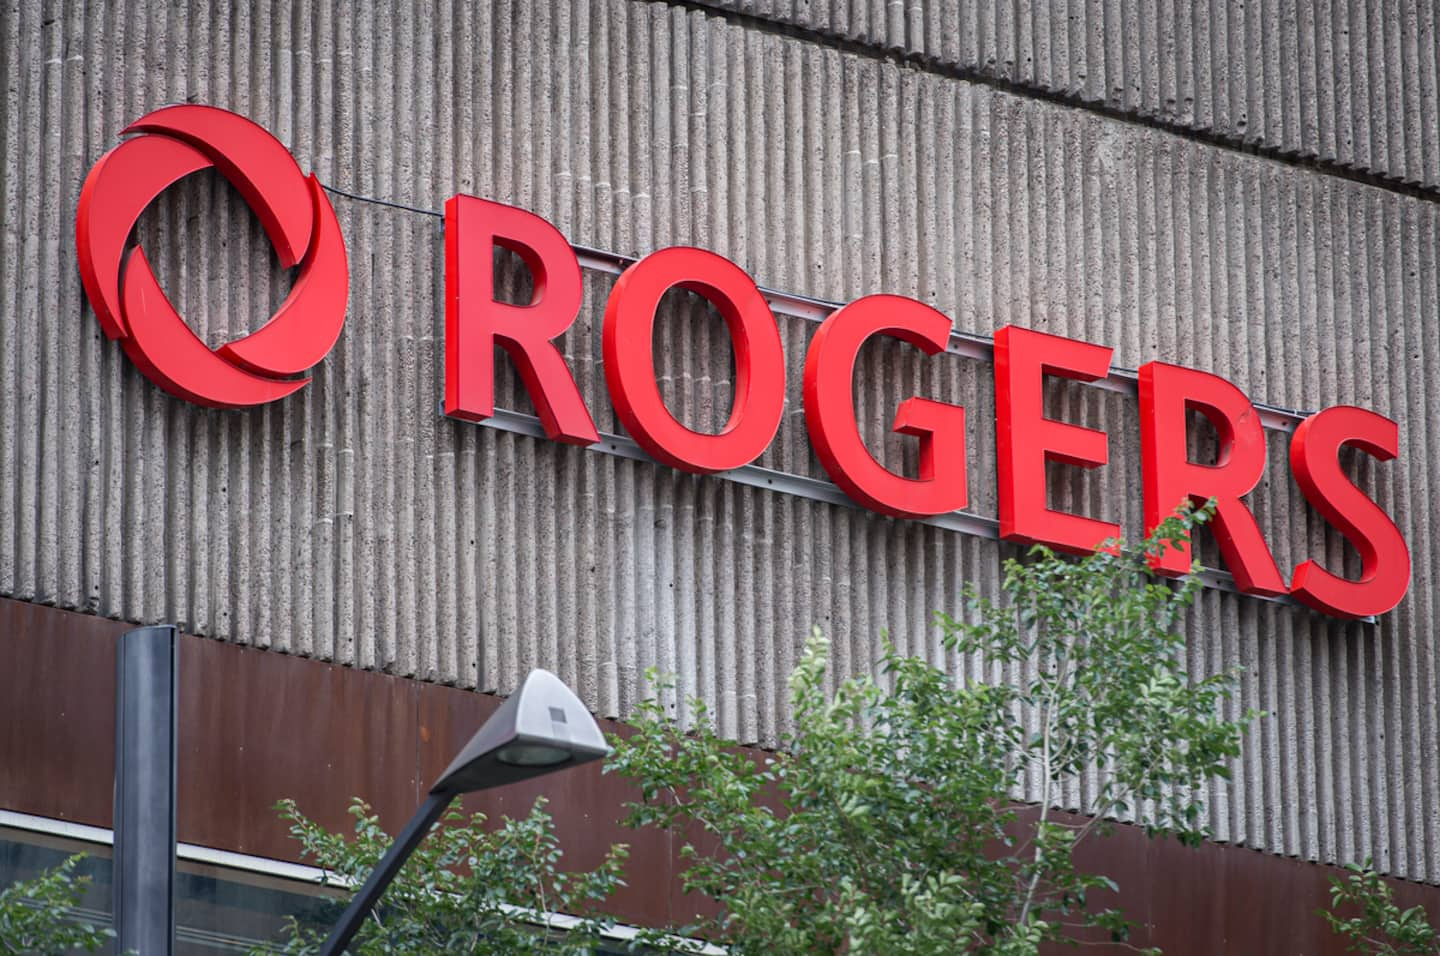 Takeover of Shaw by Rogers: no progress with mediation